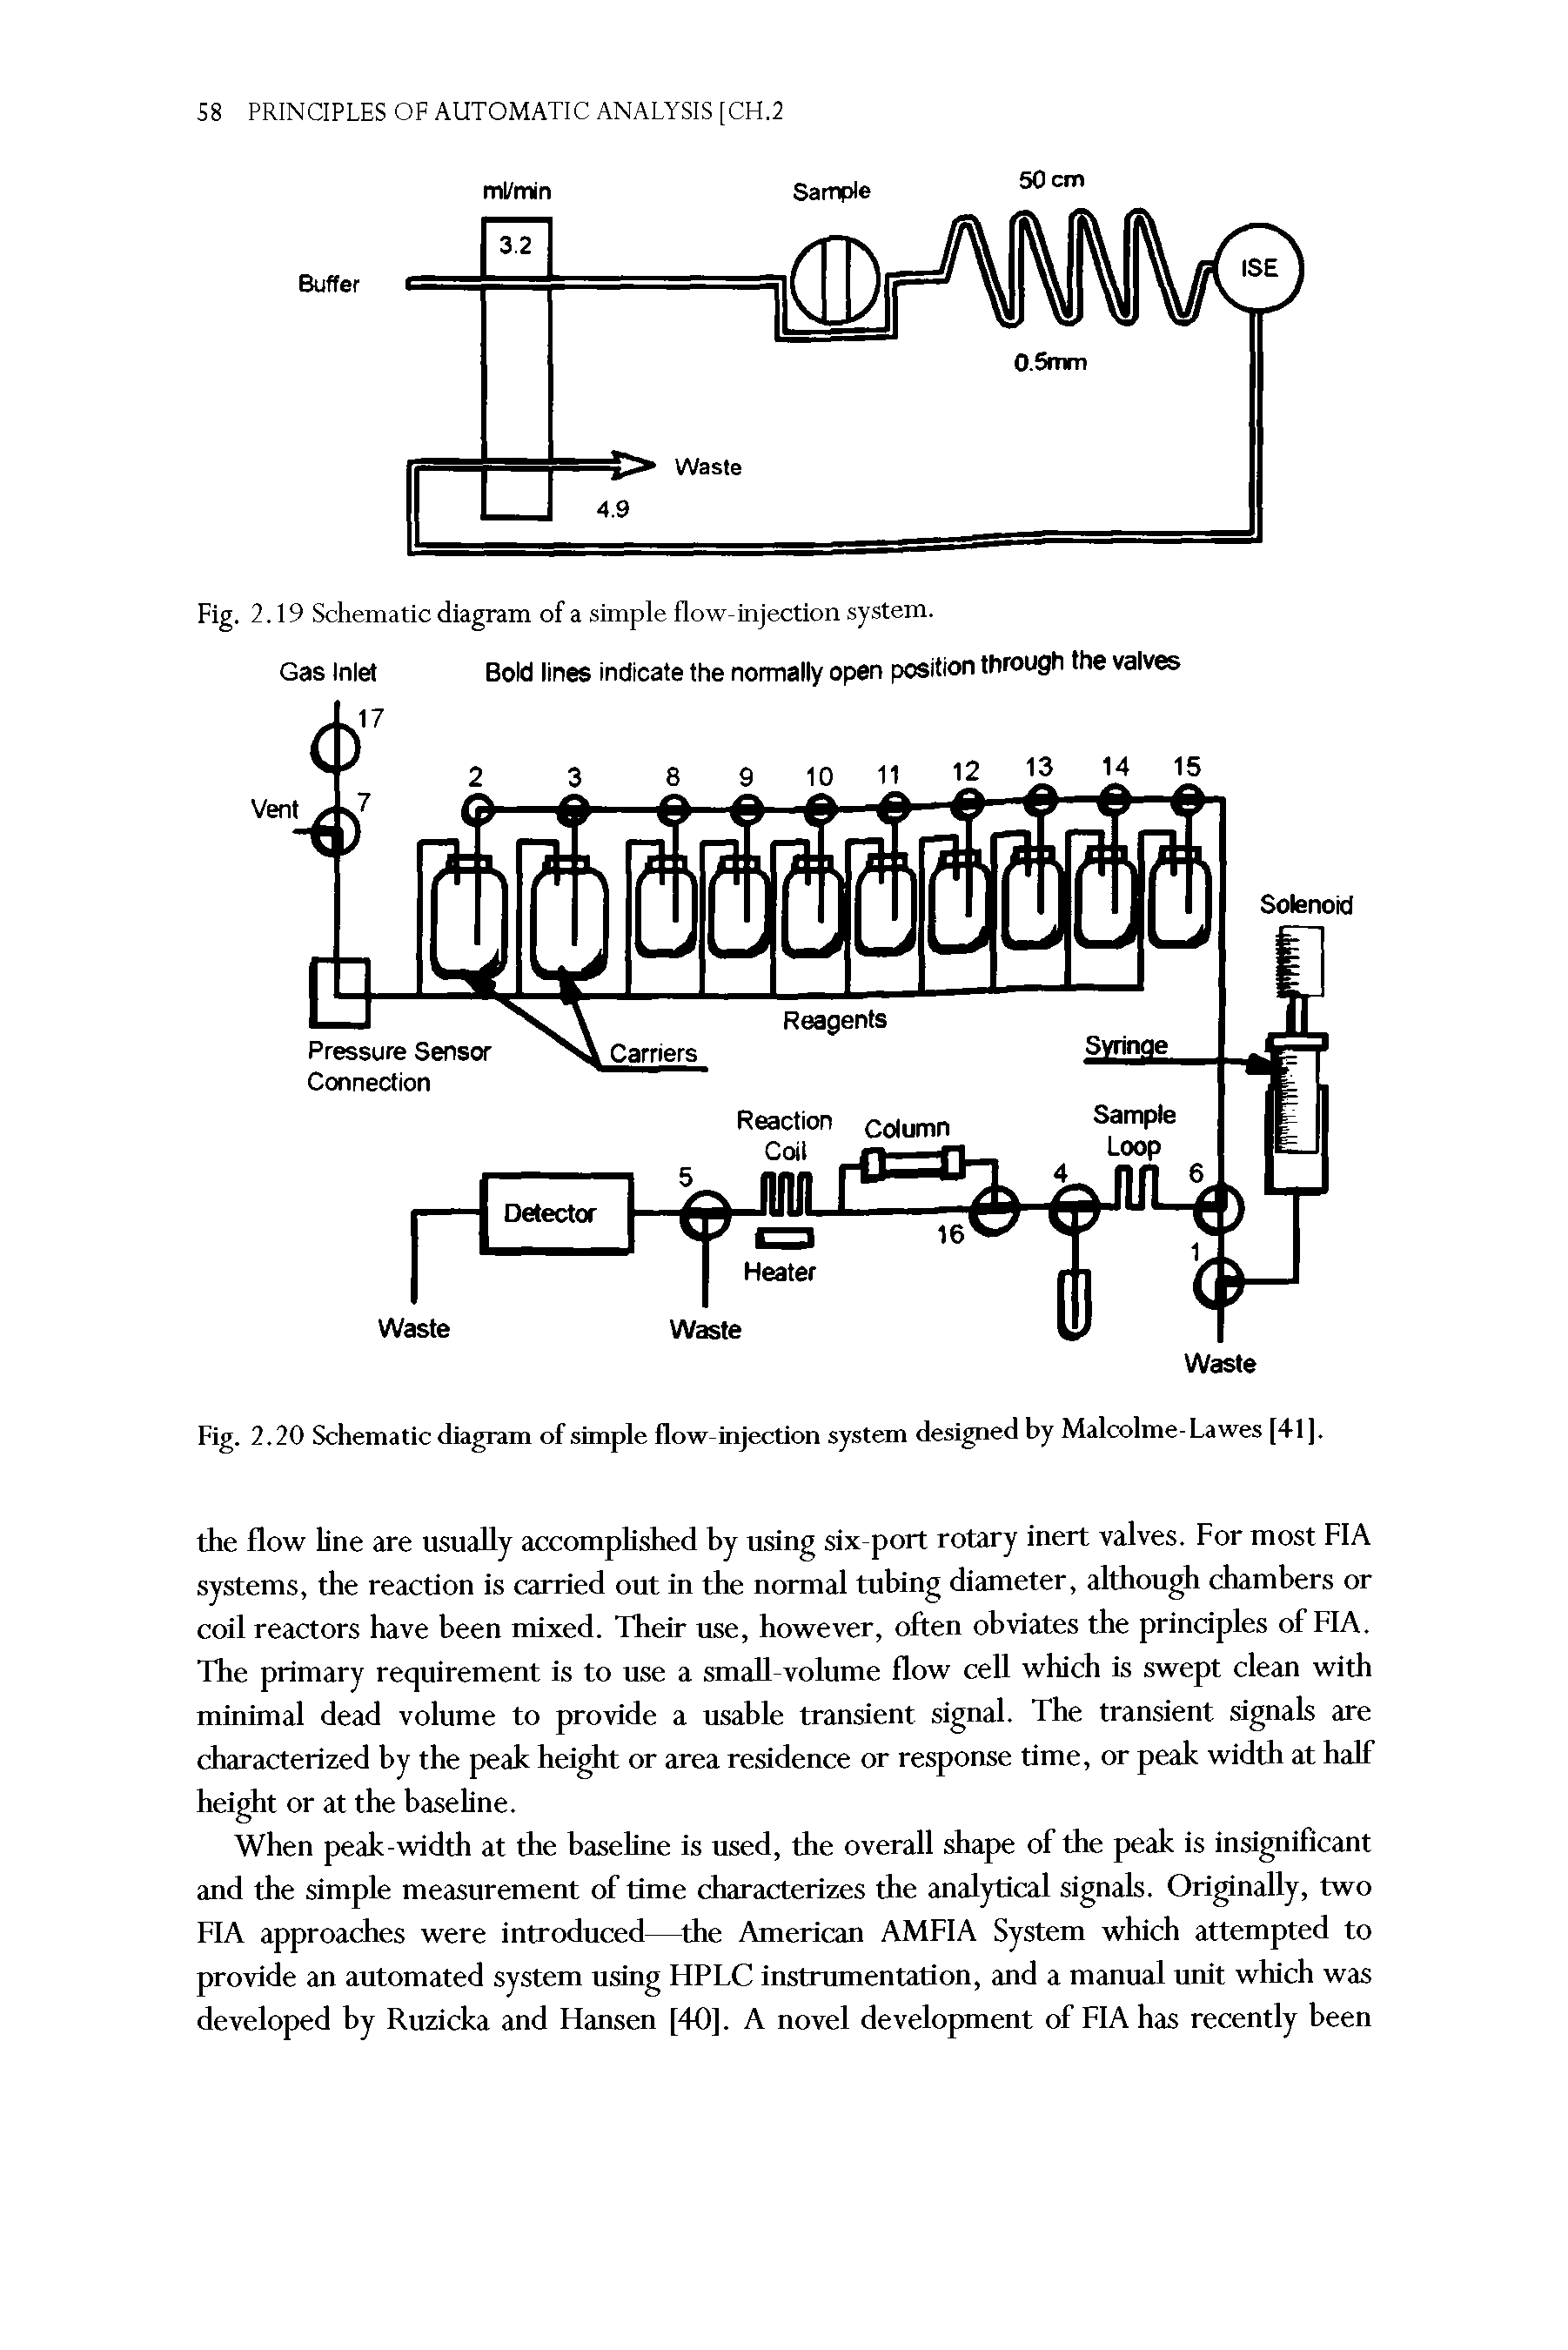 Fig. 2.20 Schematic diagram of simple flow-injection system designed by Malcolme-Lawes [41].